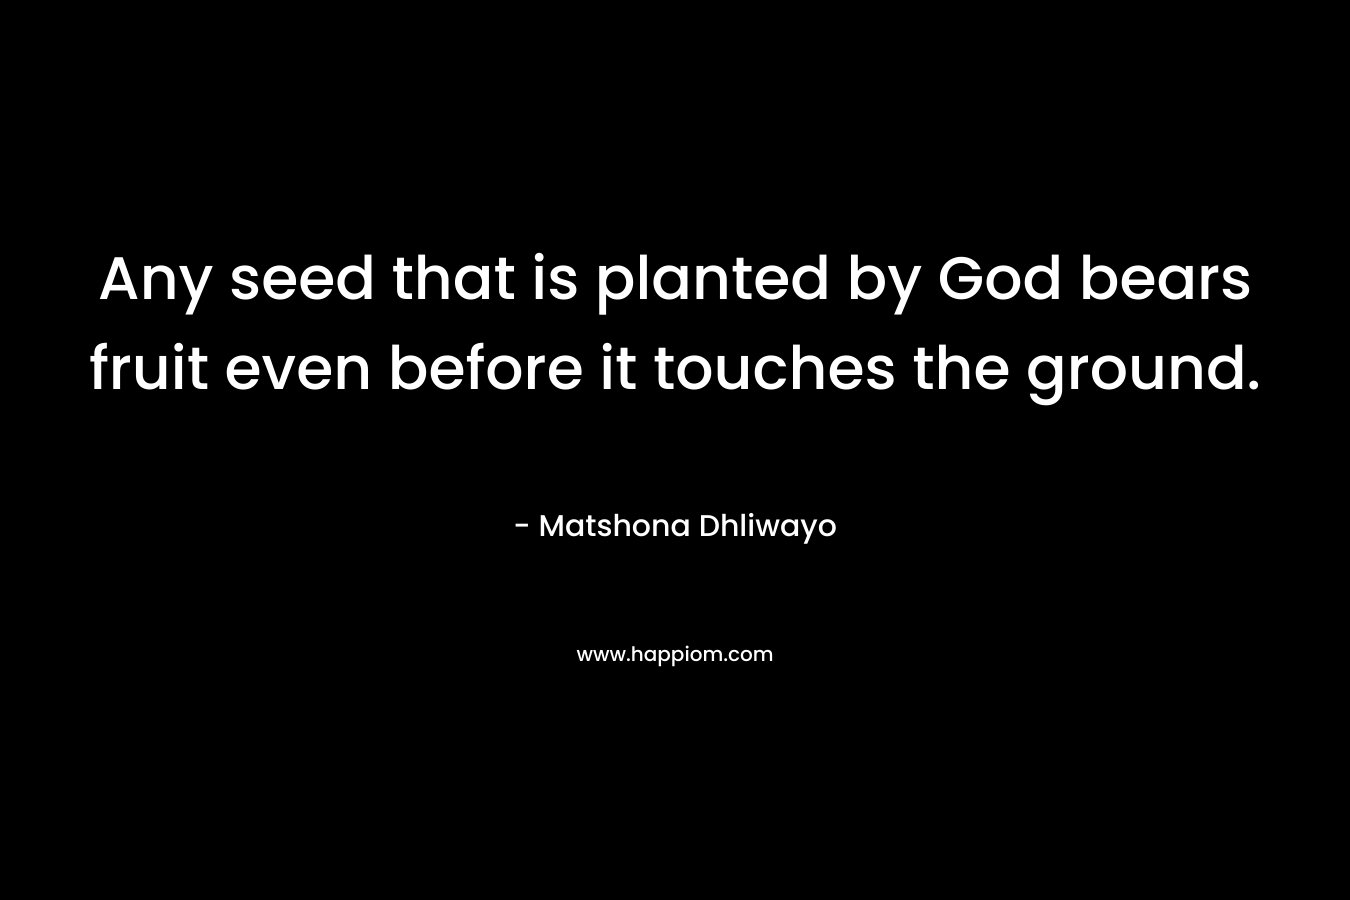 Any seed that is planted by God bears fruit even before it touches the ground. – Matshona Dhliwayo